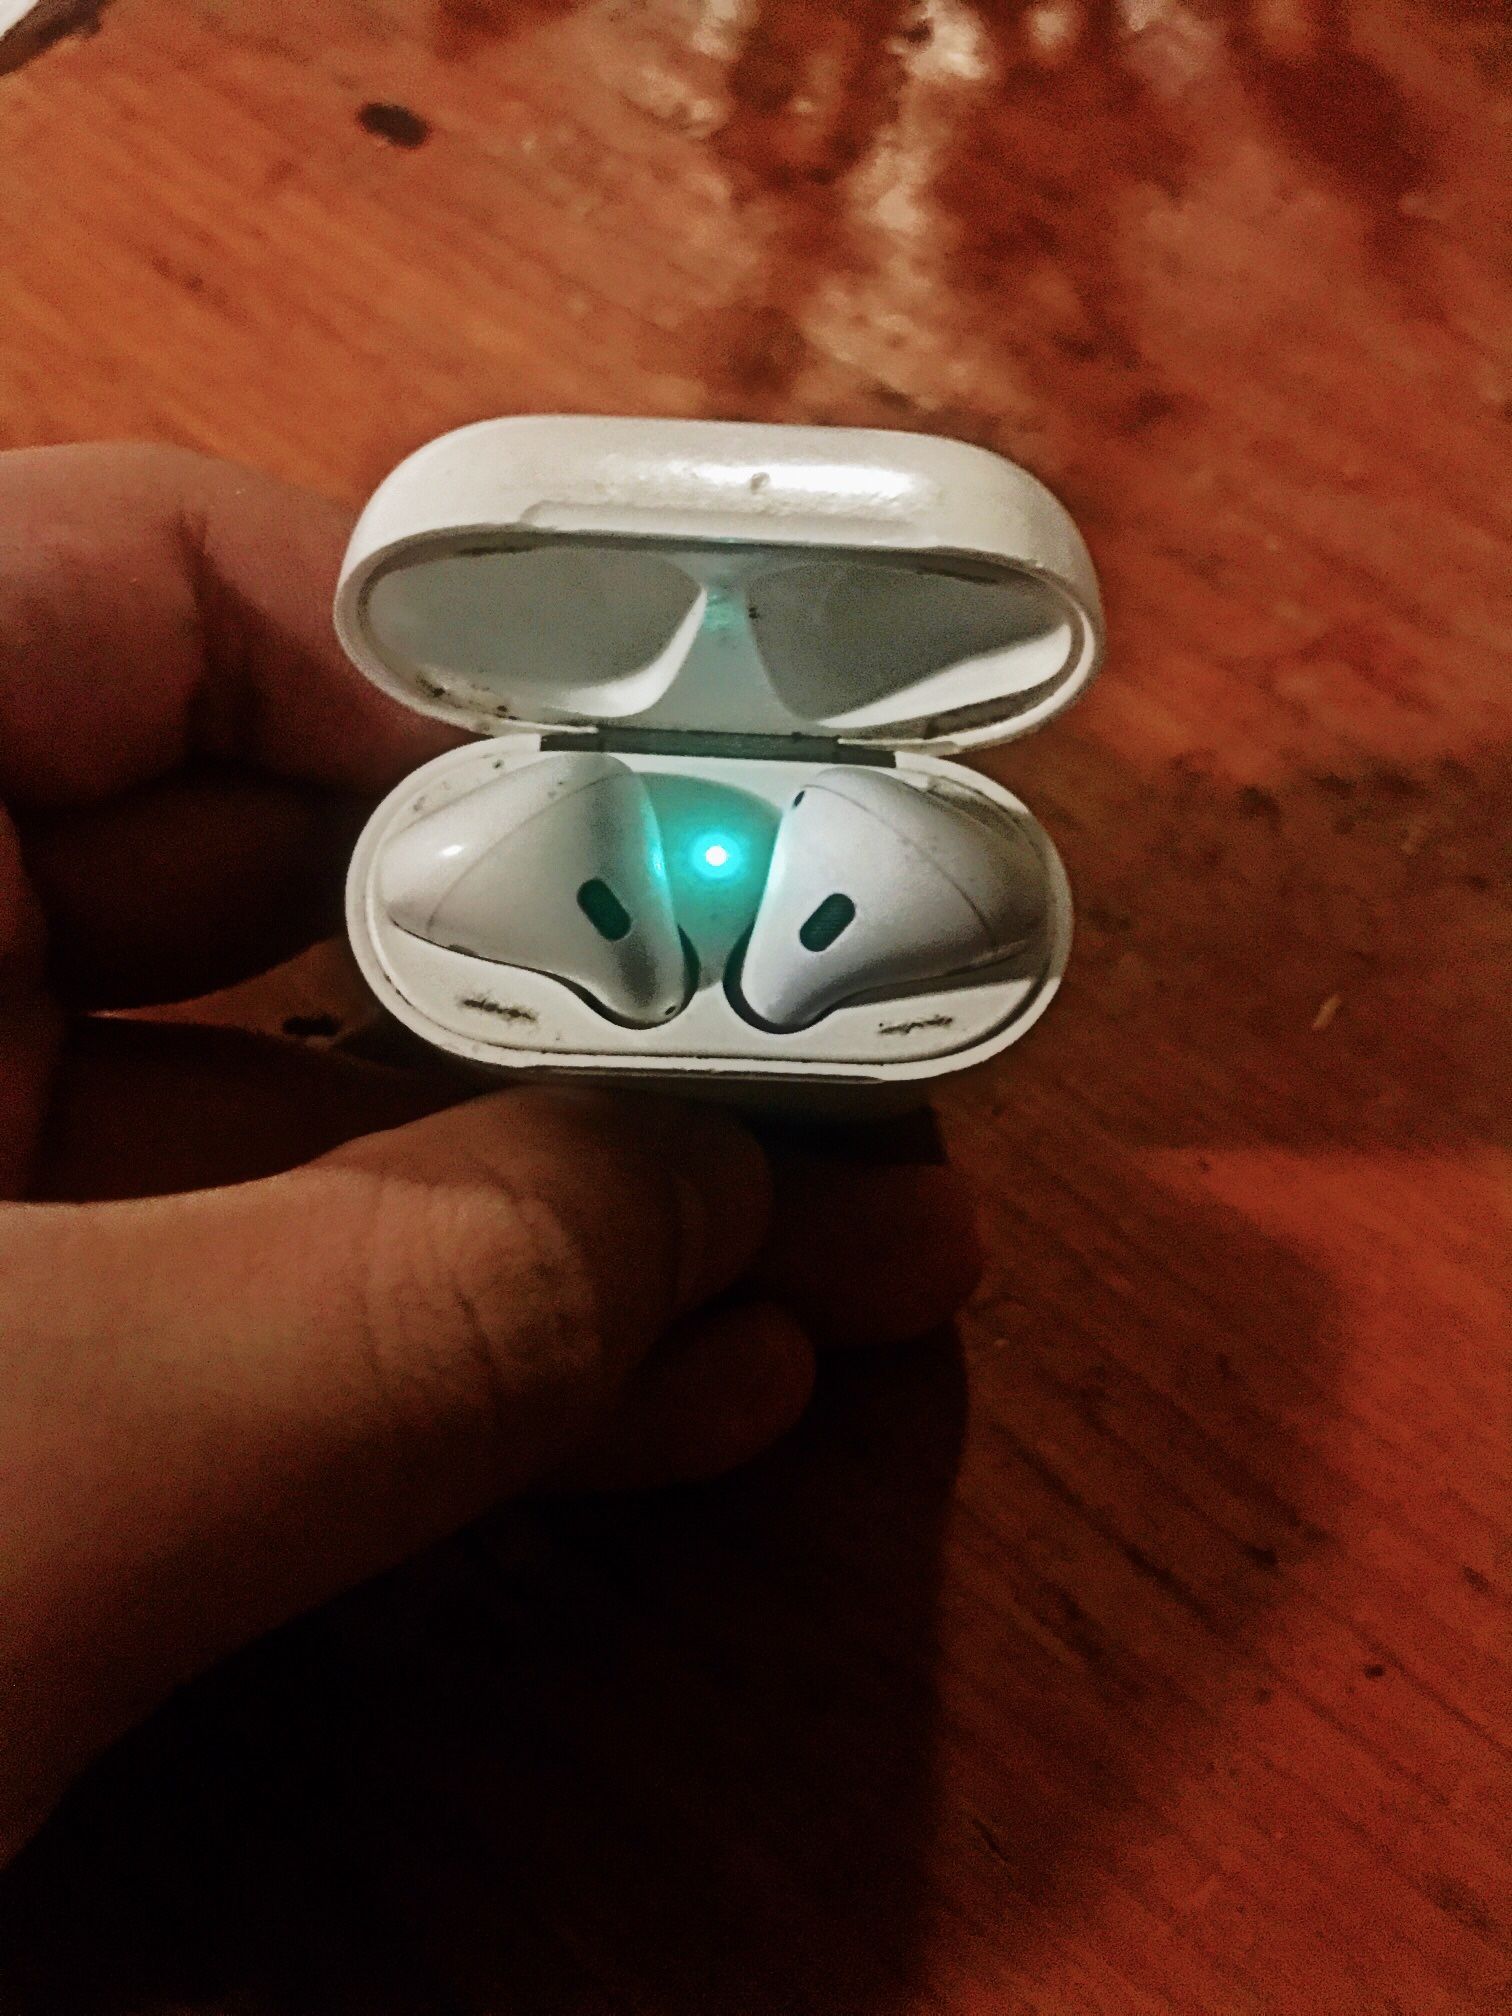 “AirPods”